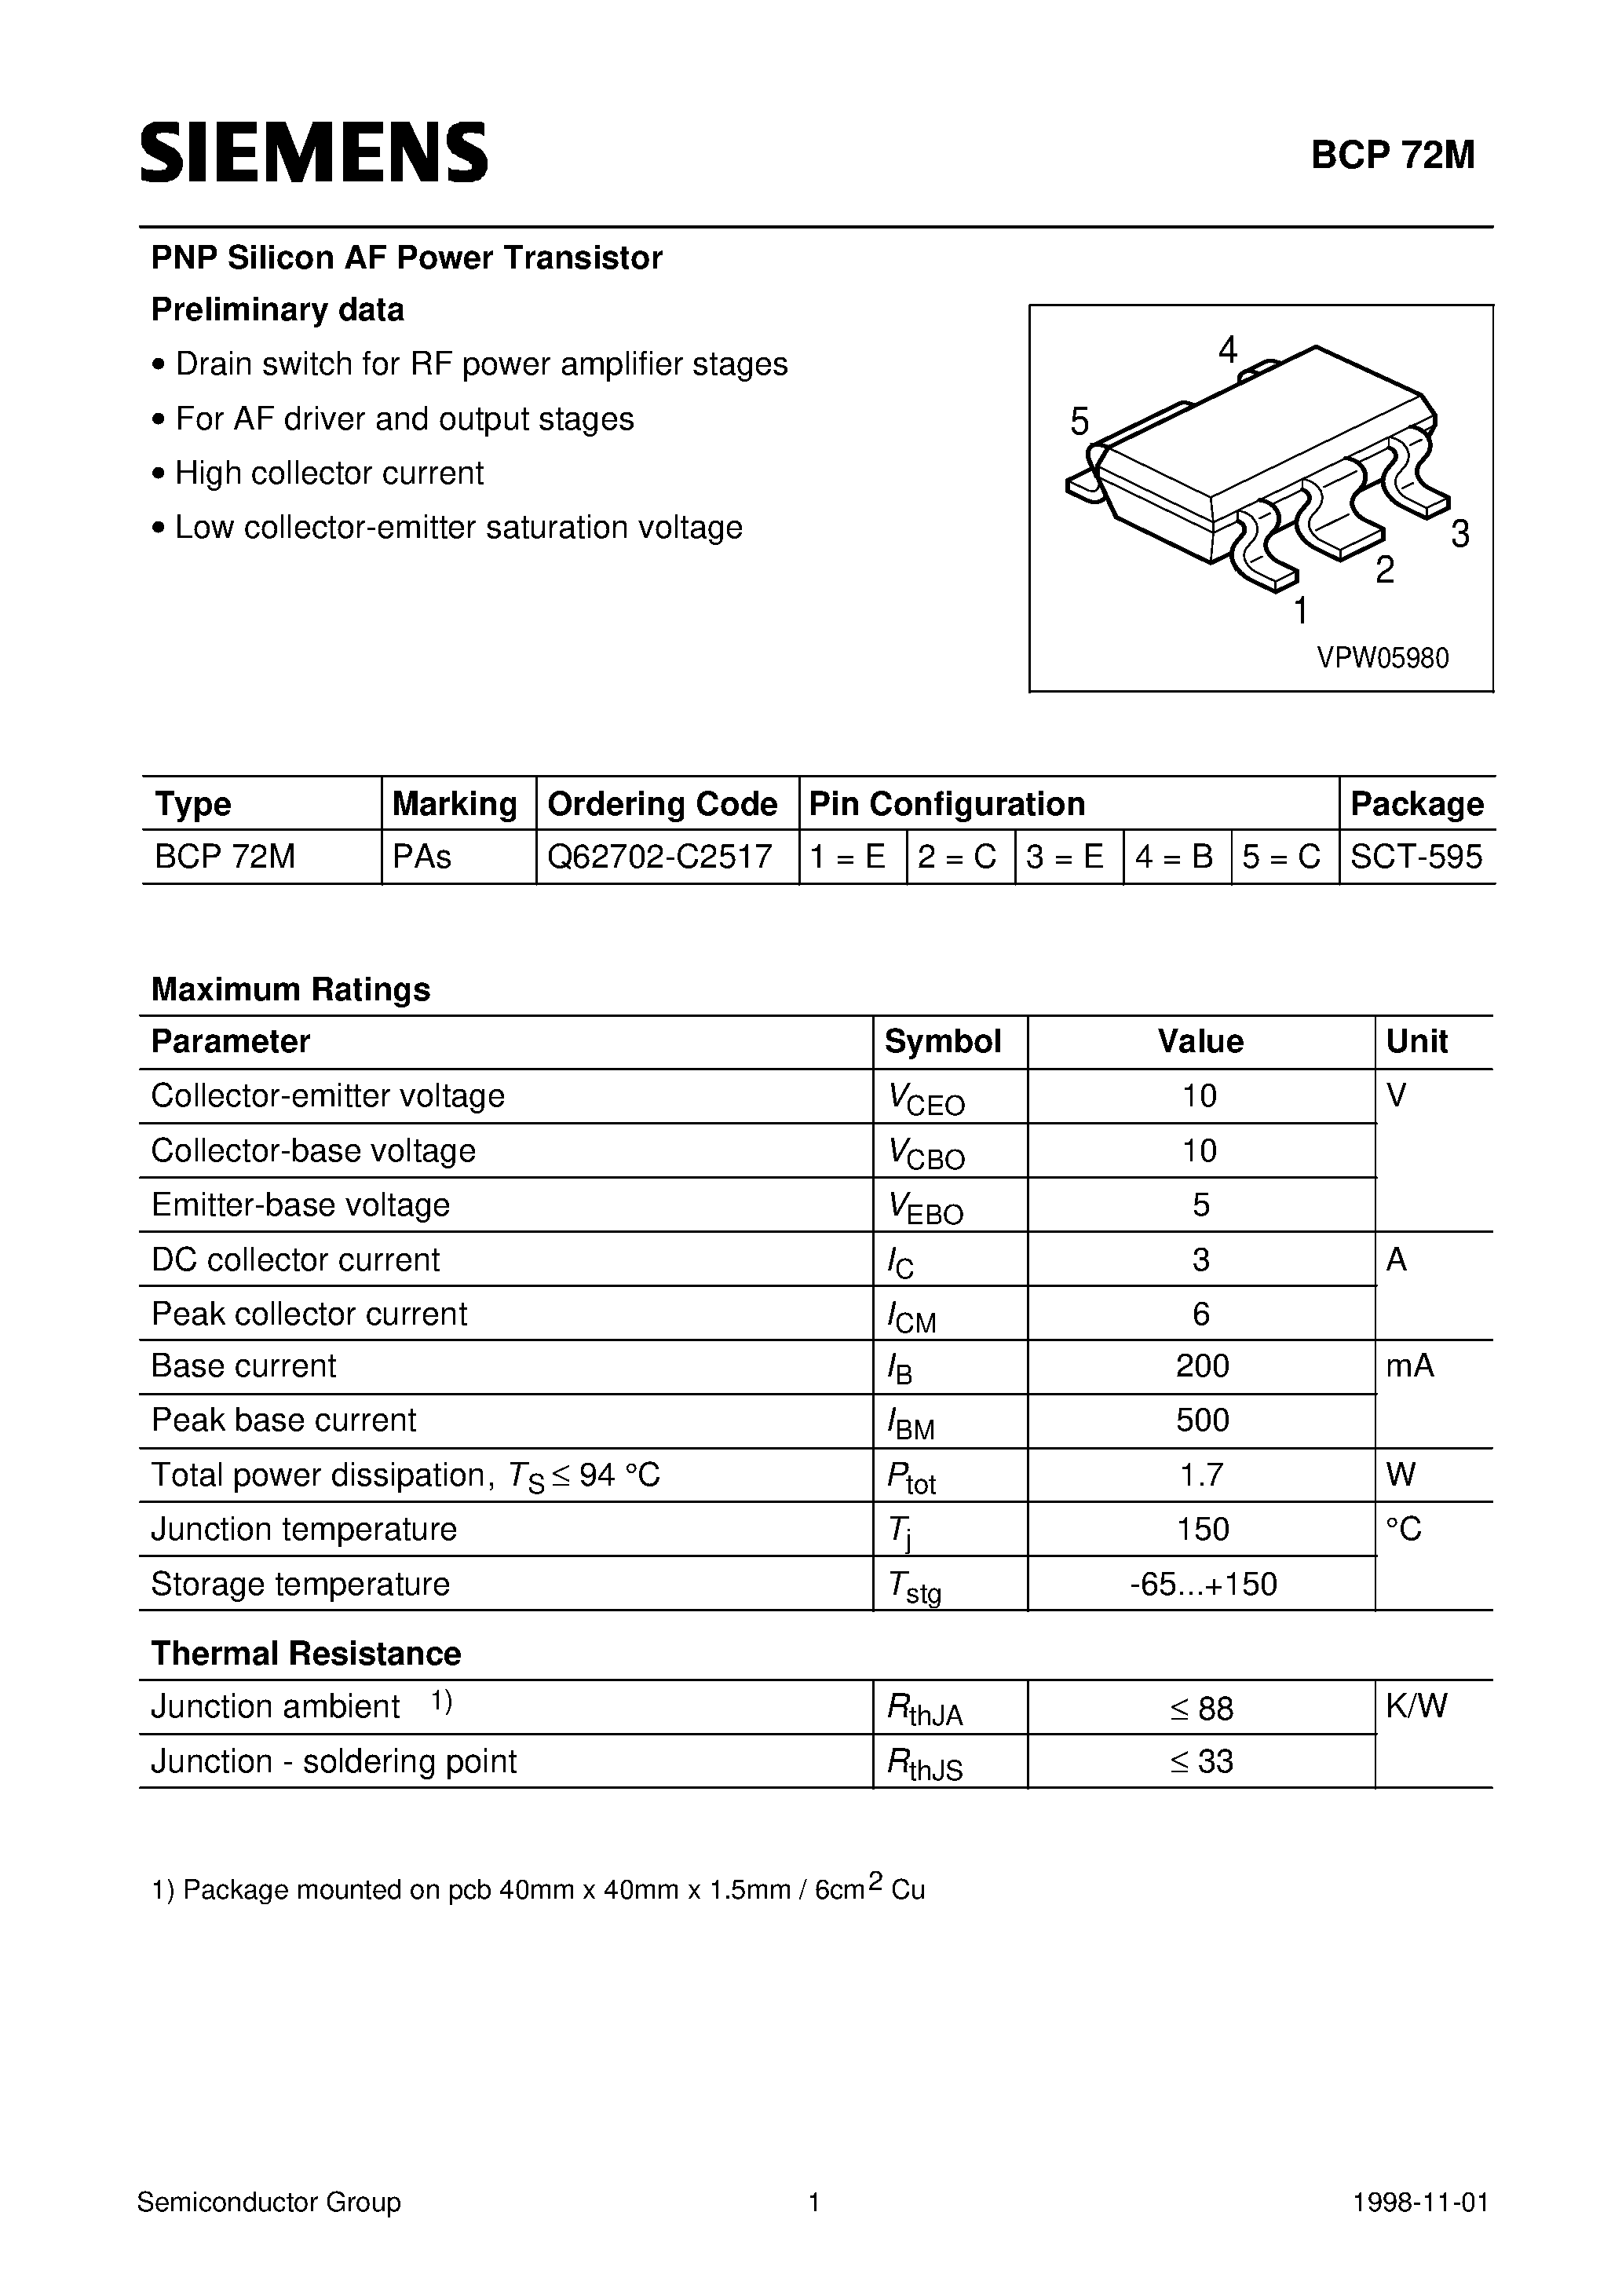 Datasheet BCP72M - PNP Silicon AF Power Transistor (Drain switch for RF power amplifier stages For AF driver and output stages High collector current) page 1